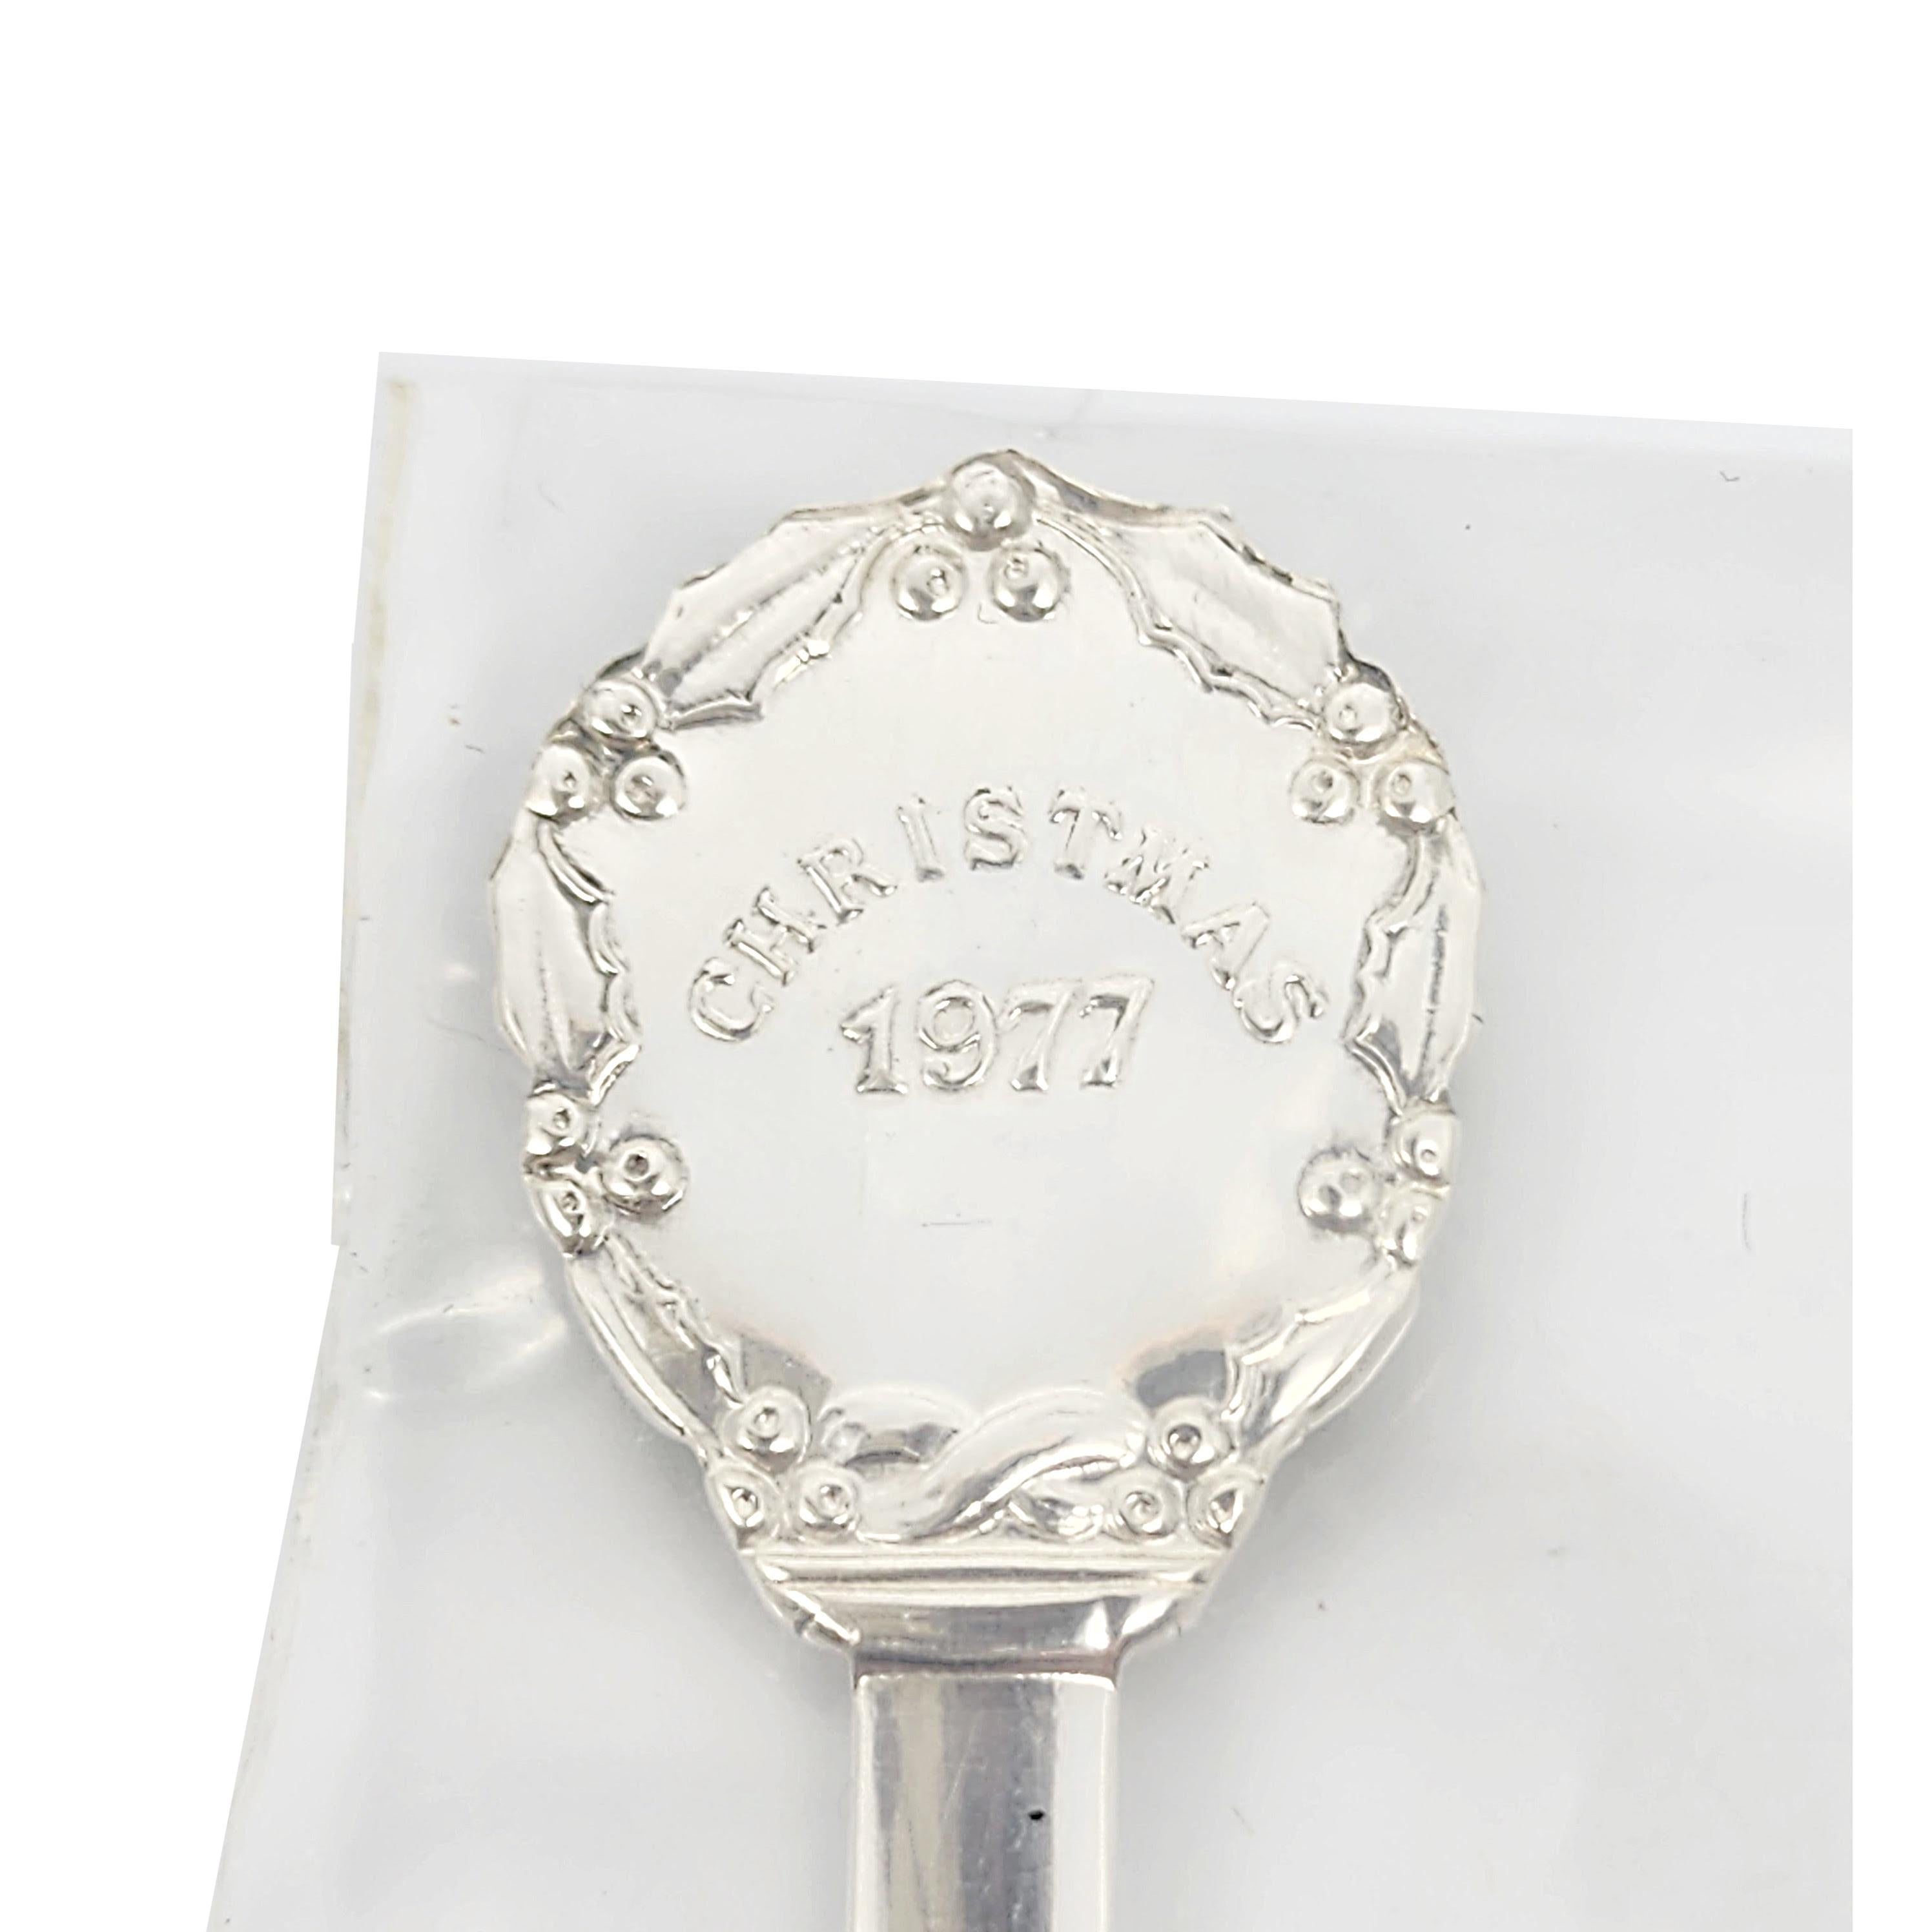 Gorham Sterling Silver 1977 Christmas Spoon Sealed with Box #15798 For Sale 1